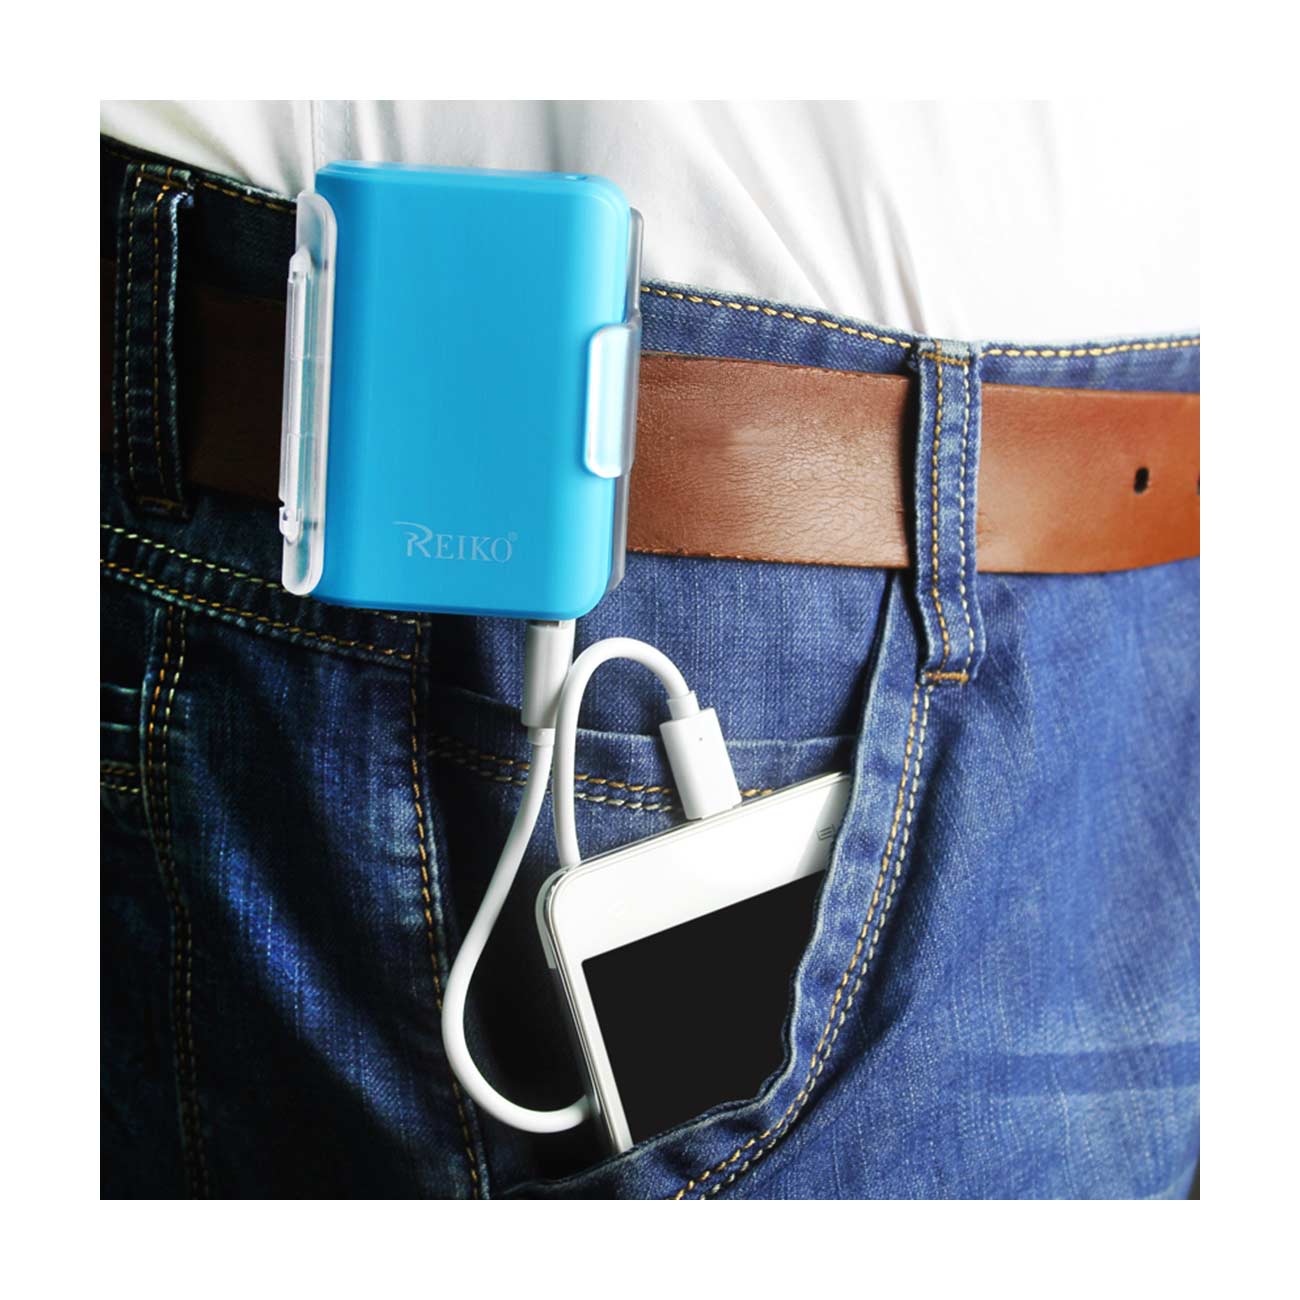 Power Bank Universal With Cable 4000Mah Blue Color